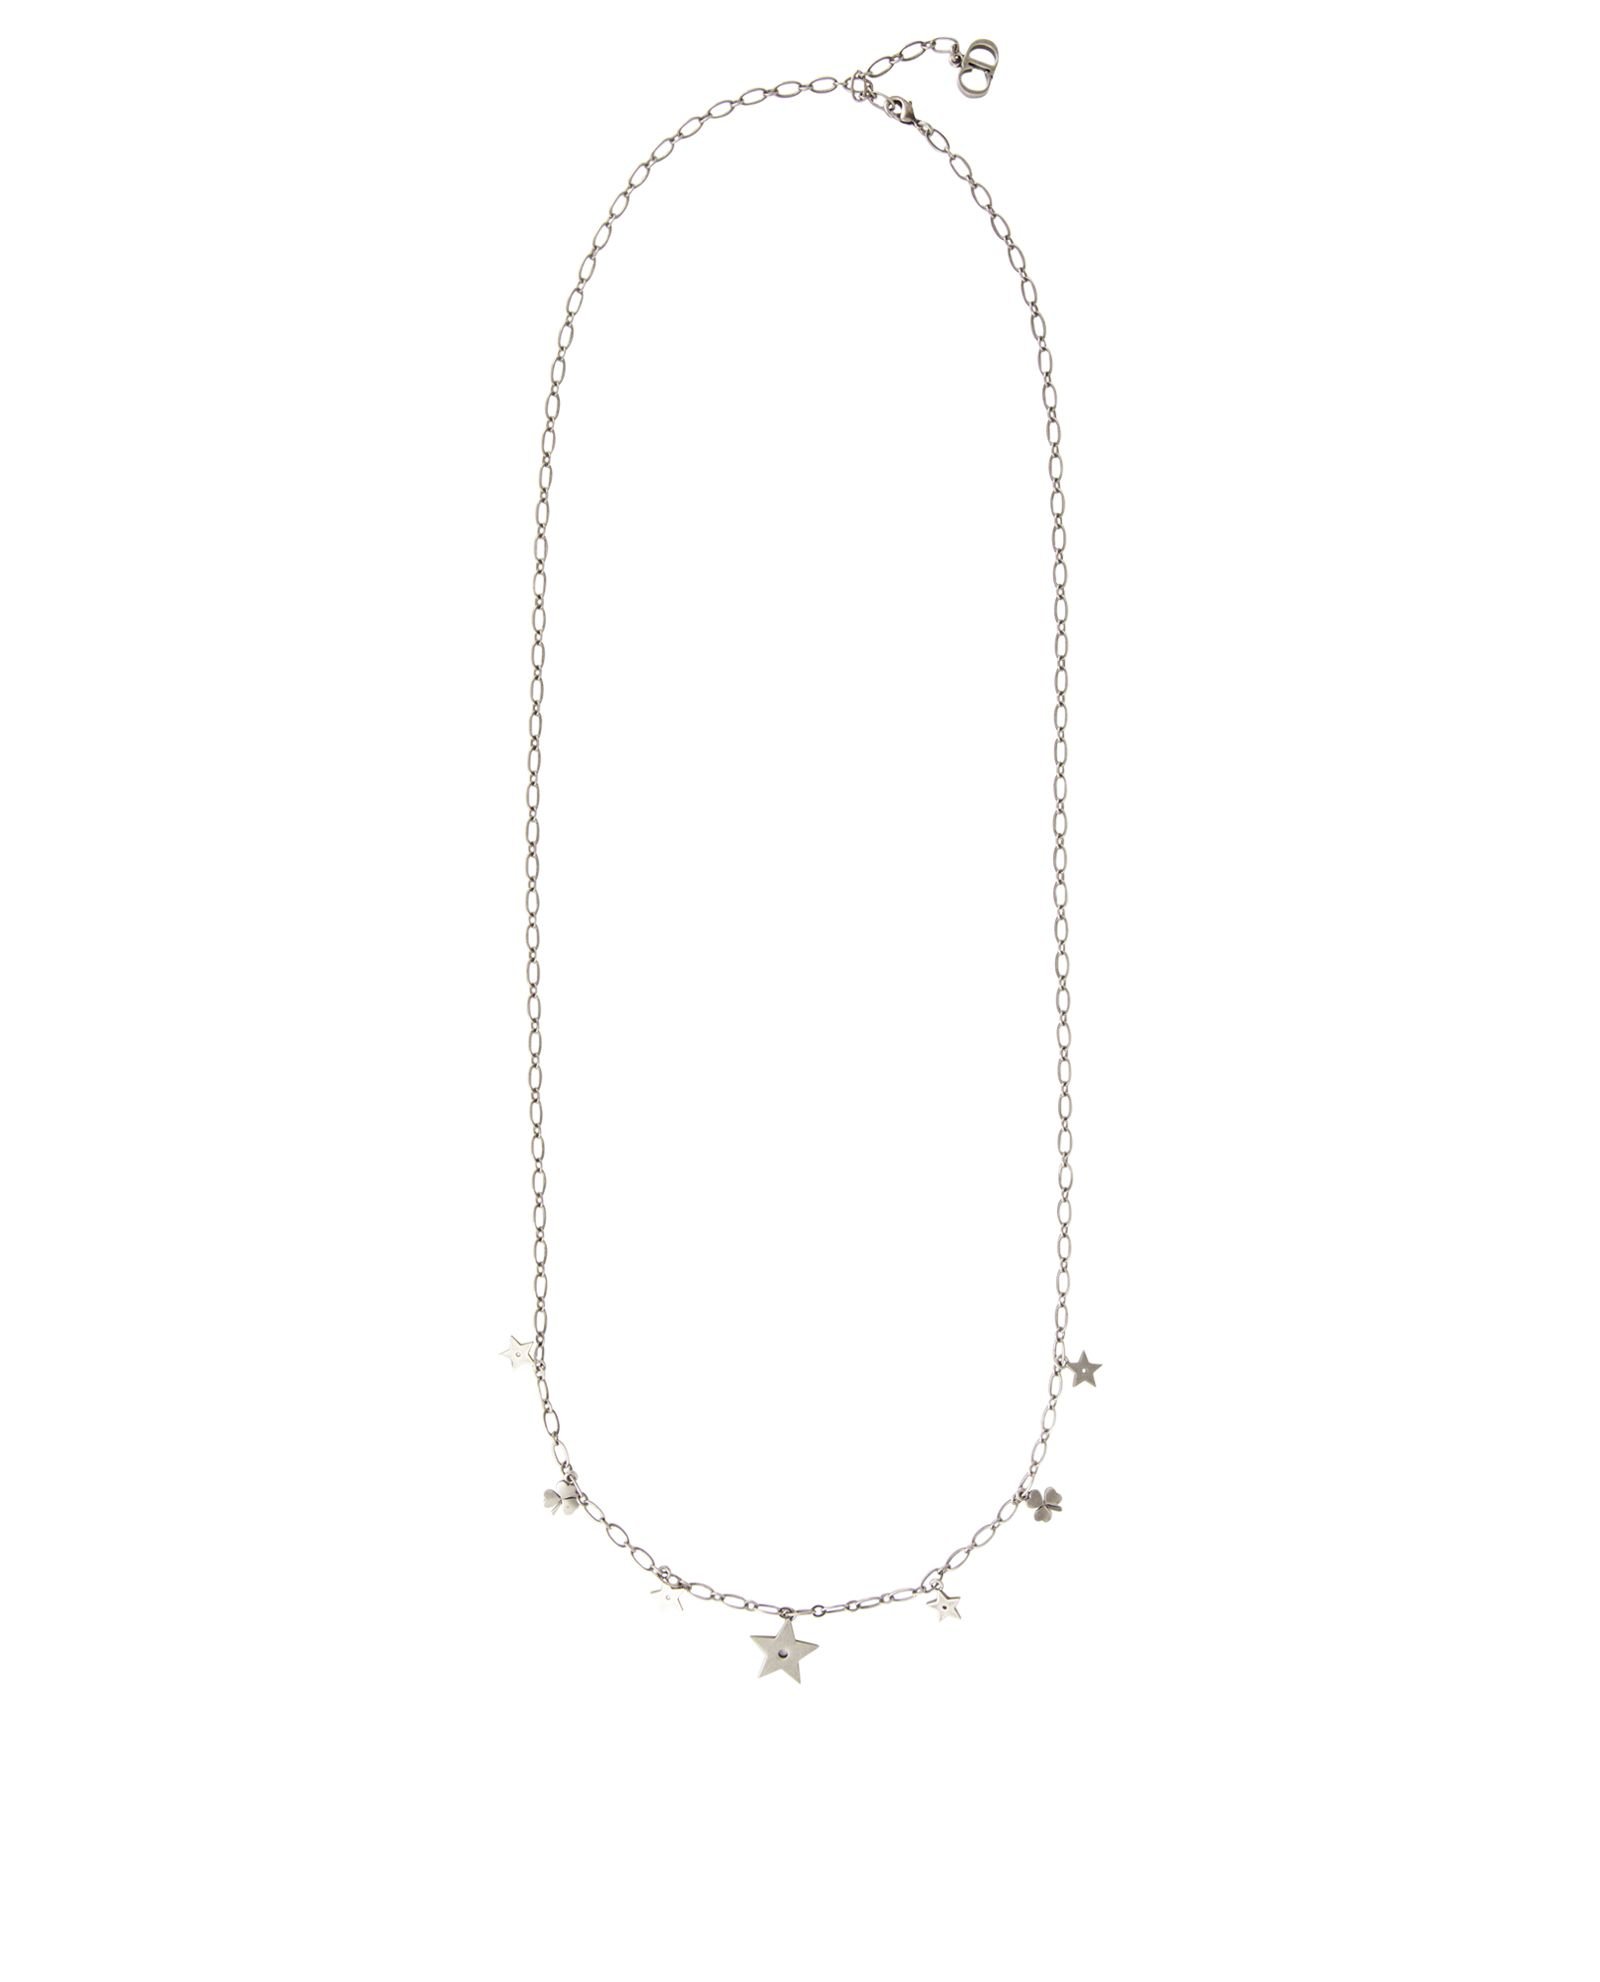 Christian Dior Star & Clover Charm Necklace - Gold-Tone Metal Station,  Necklaces - CHR165964